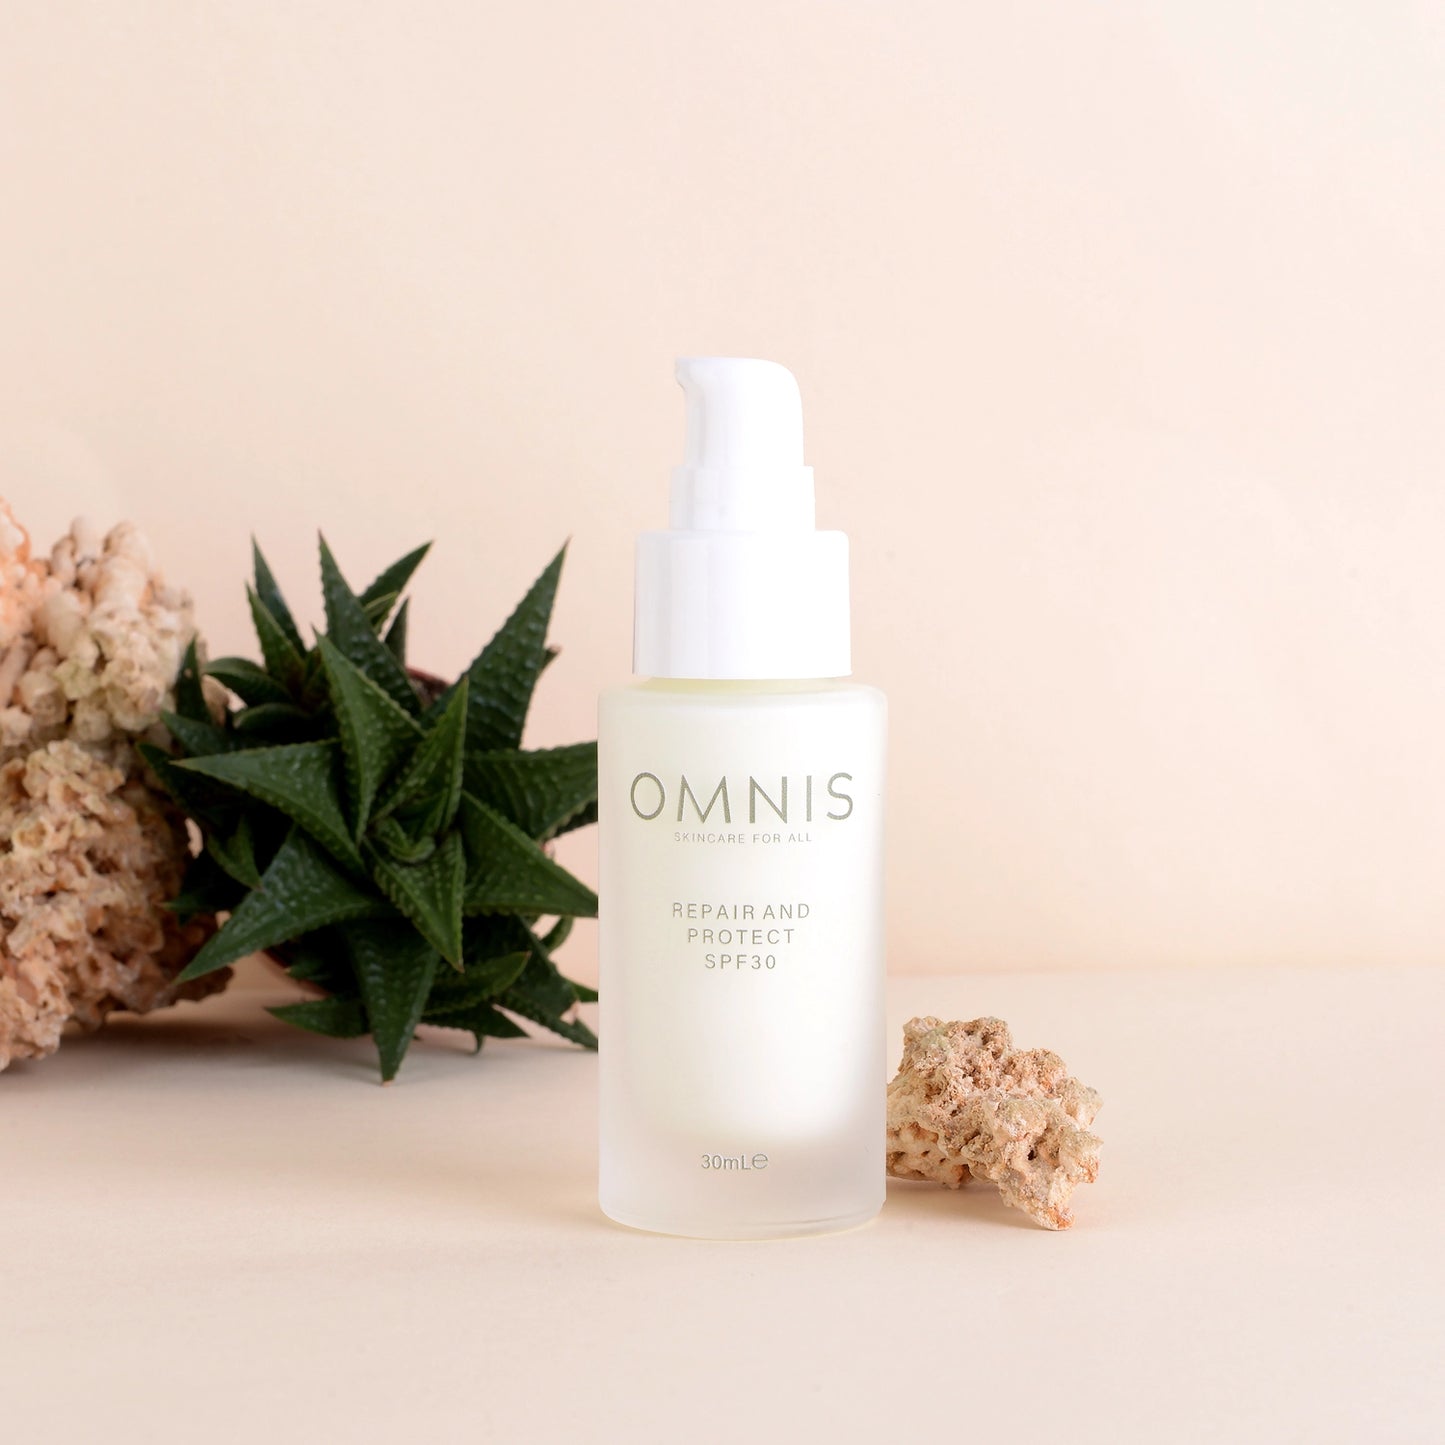 Omnis Repair and Protect SPF 30 - Buy at Counter Culture Store